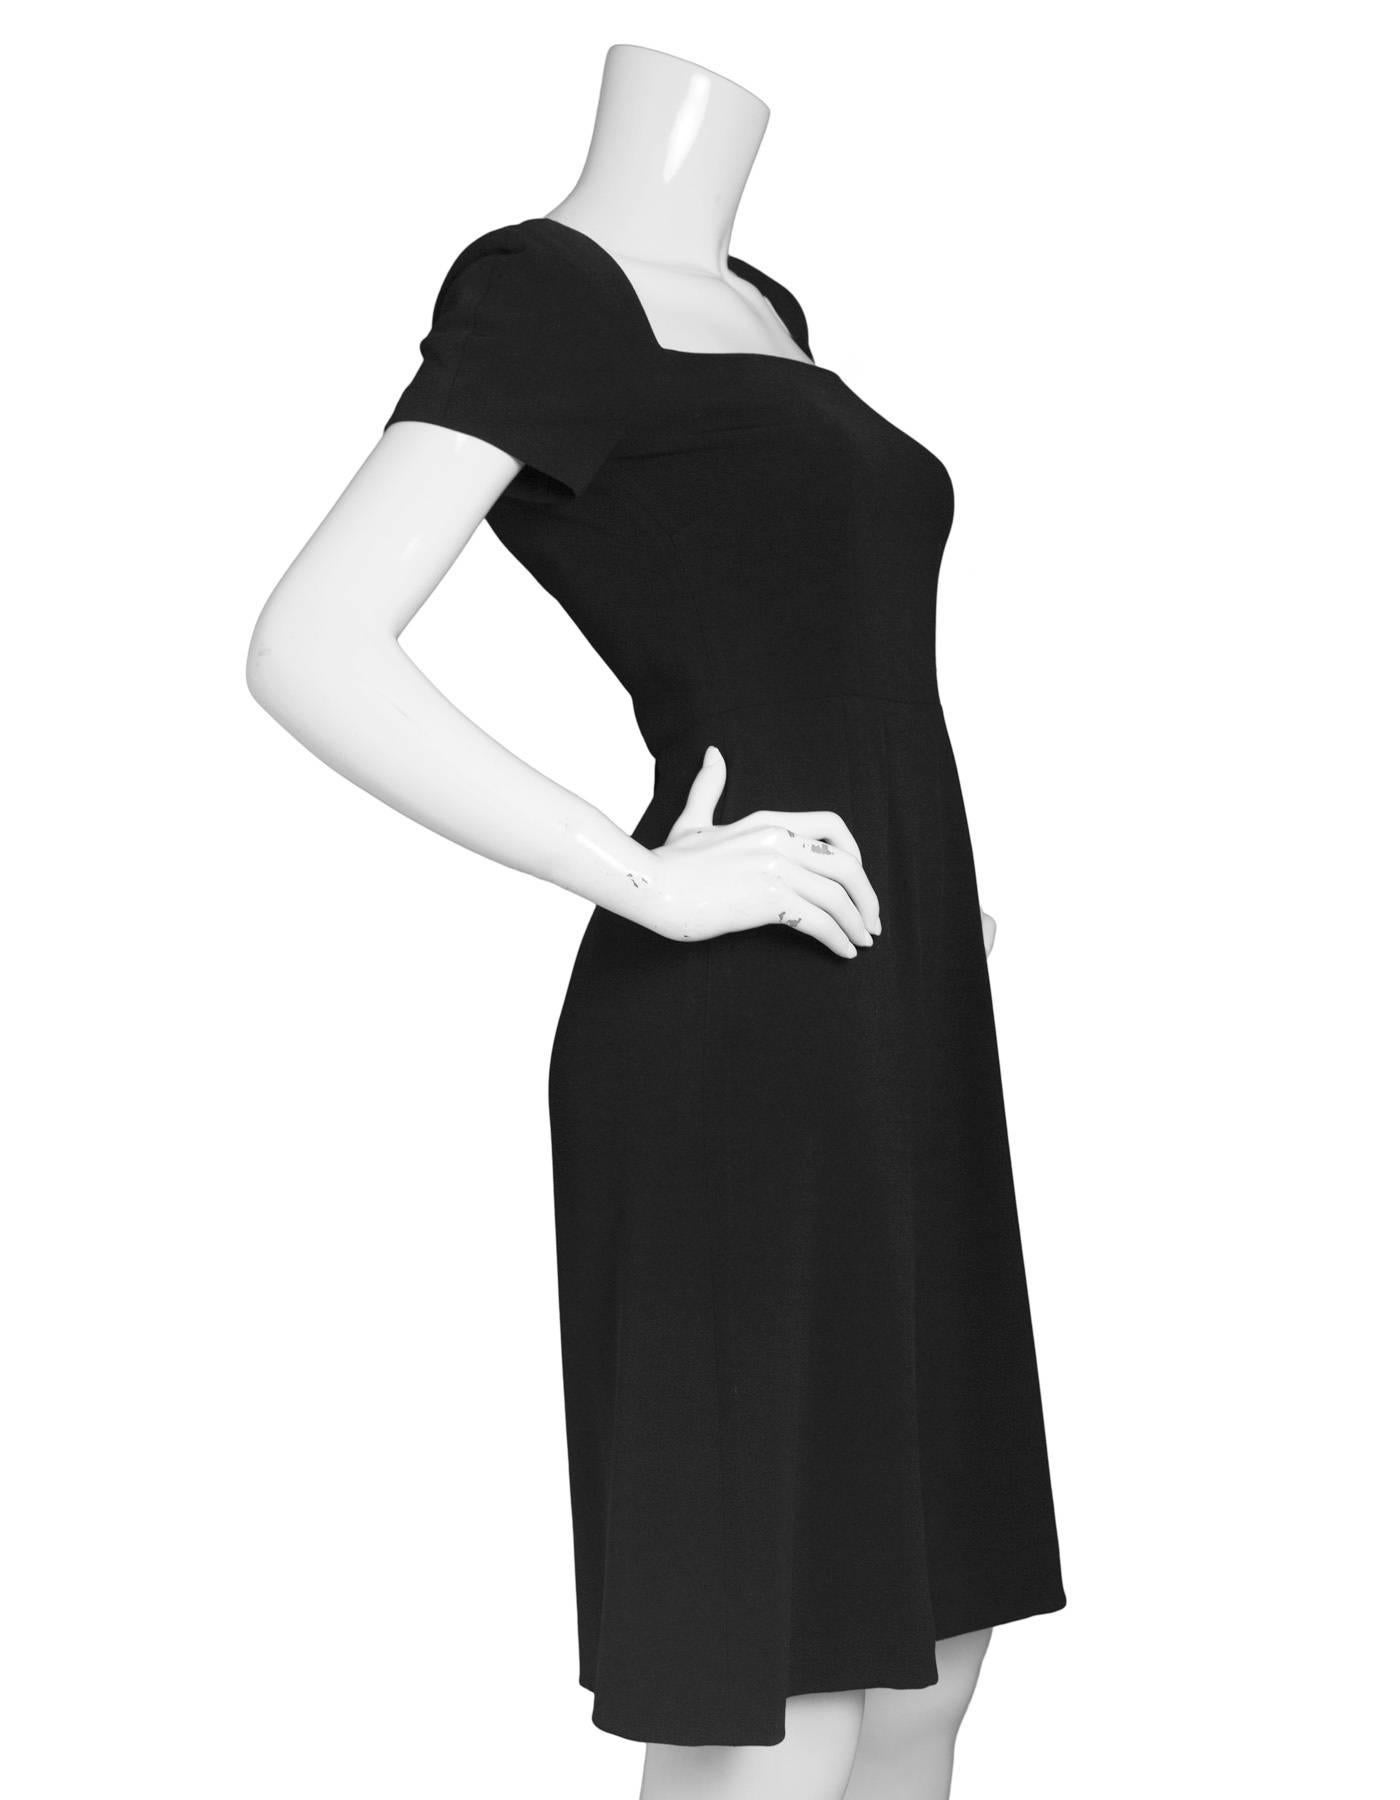 Dolce & Gabbana Black Short Sleeve Dress
Features square neckline with cap sleeves 

Made In: Italy
Color: Black
Composition: 70% viscose, 28% acetate, 4% elastane
Lining: Black, 94% silk, 6% elastane
Closure/Opening: Back zip up
Exterior